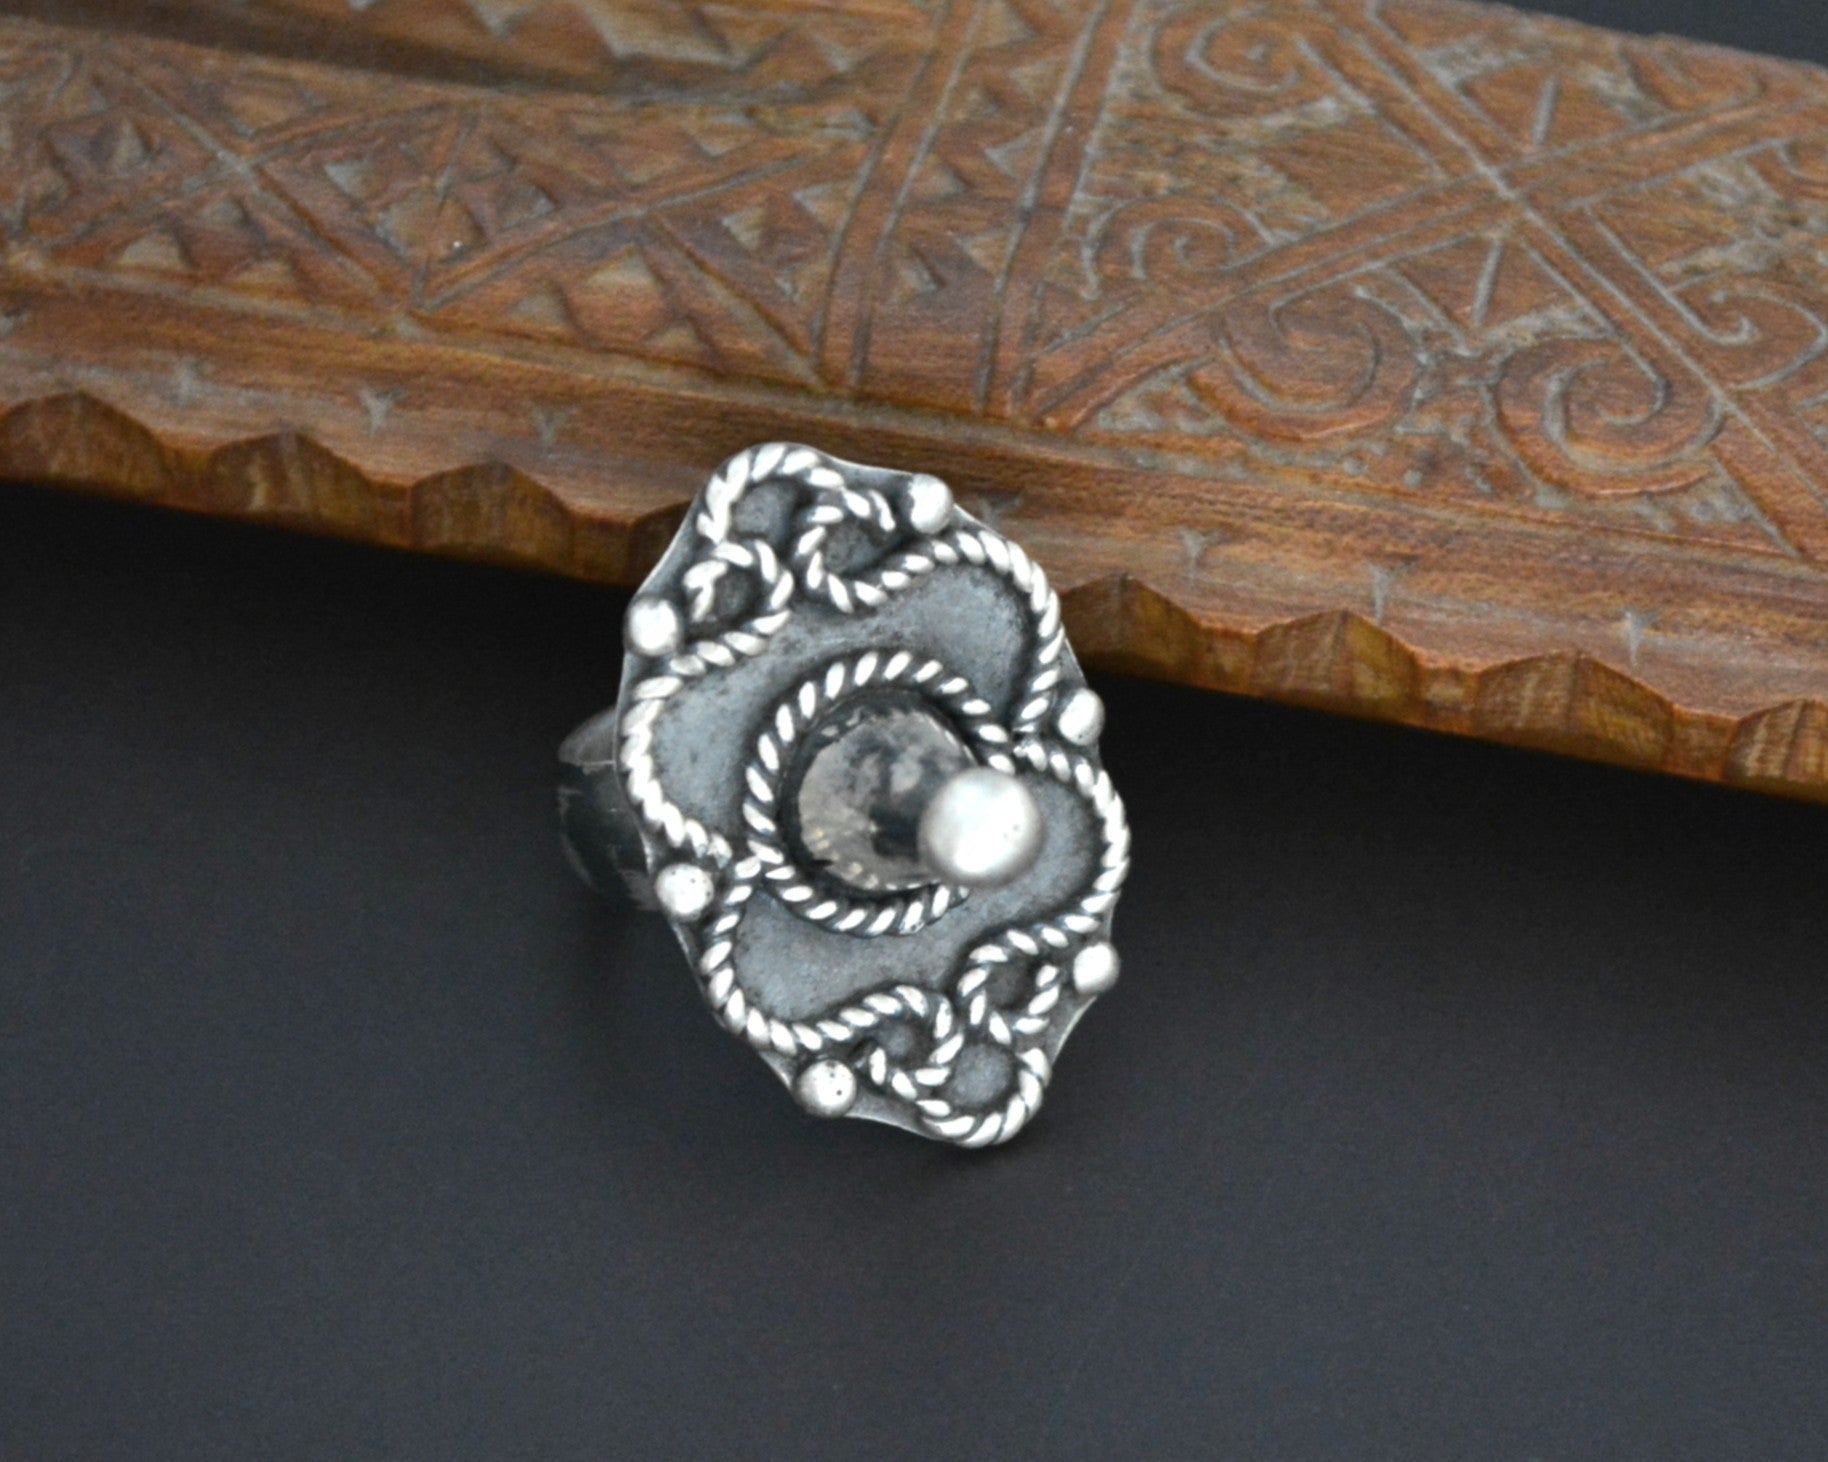 Rajasthani Silver Spike Ring - Size 7.5